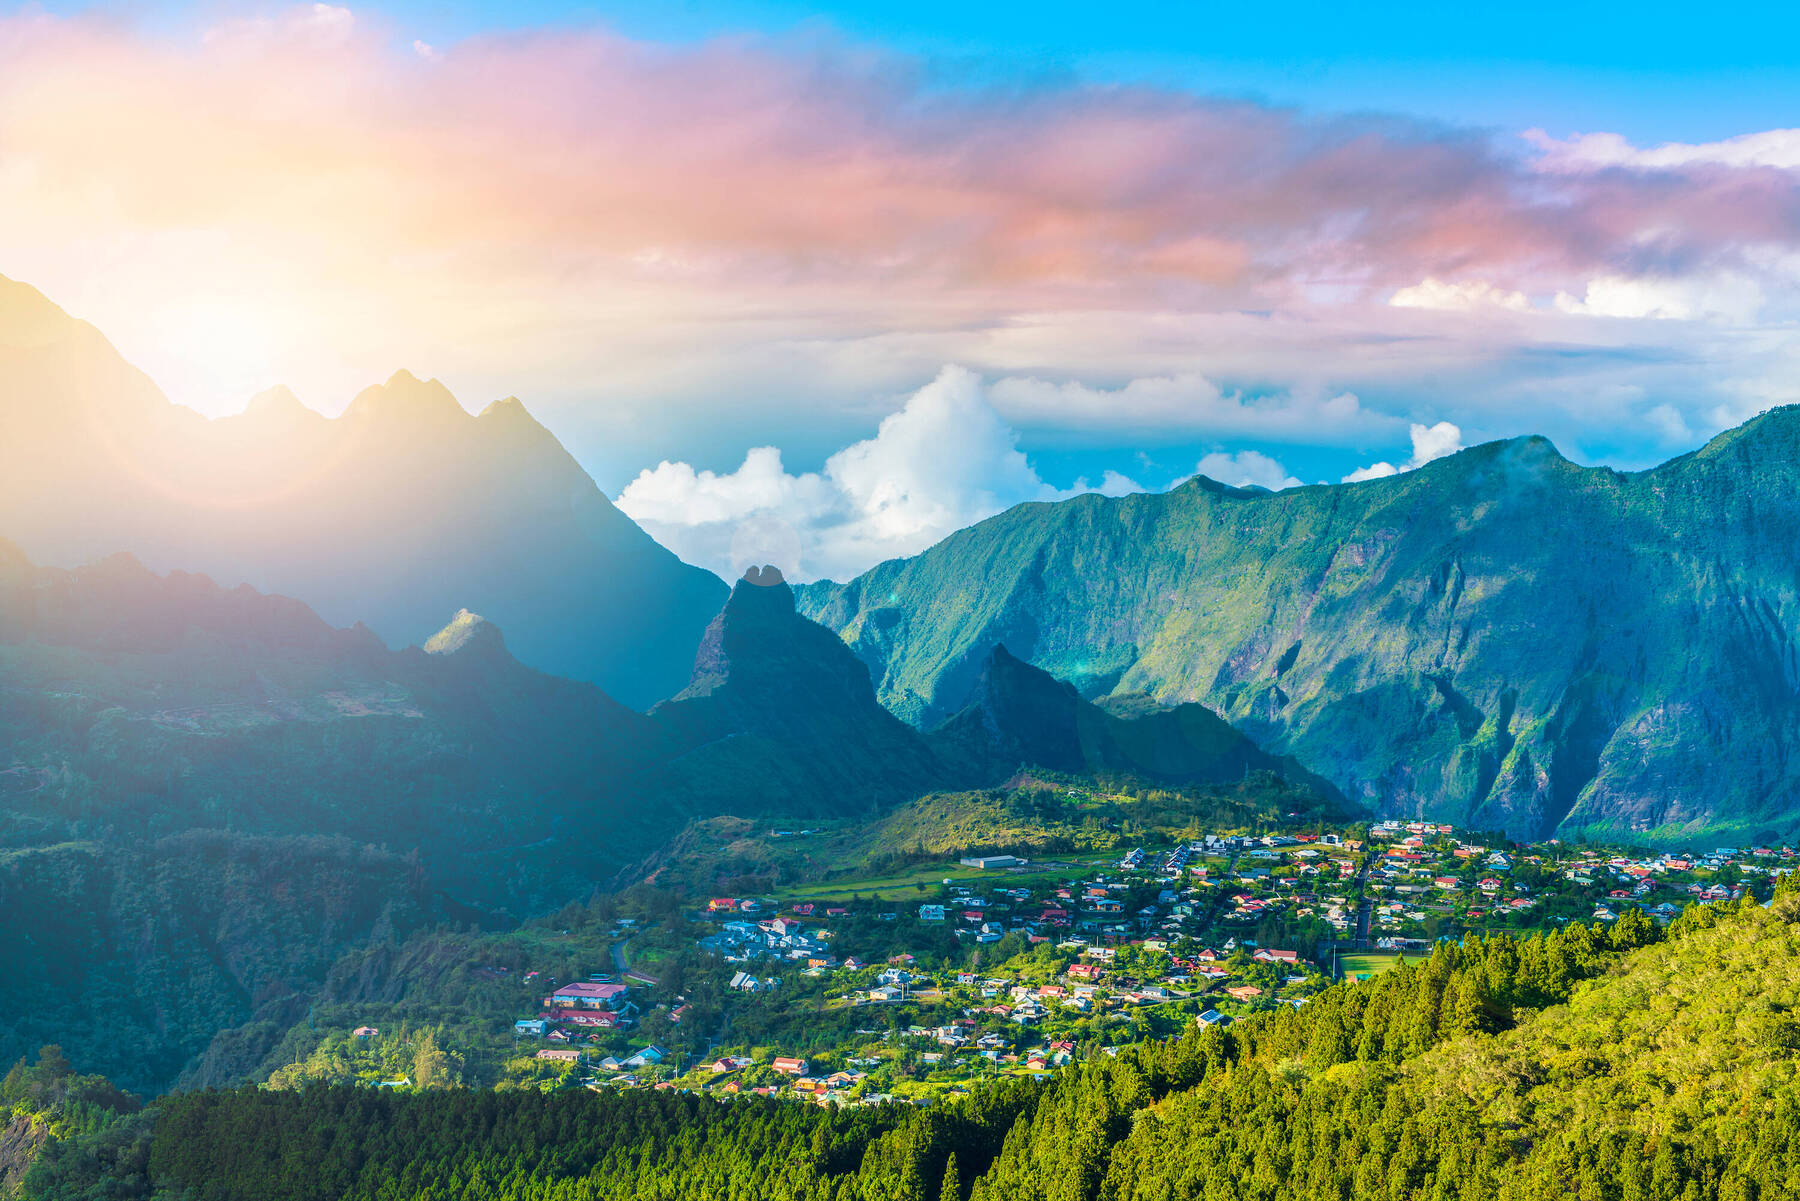 Spice up your life with a Reunion Island getaway